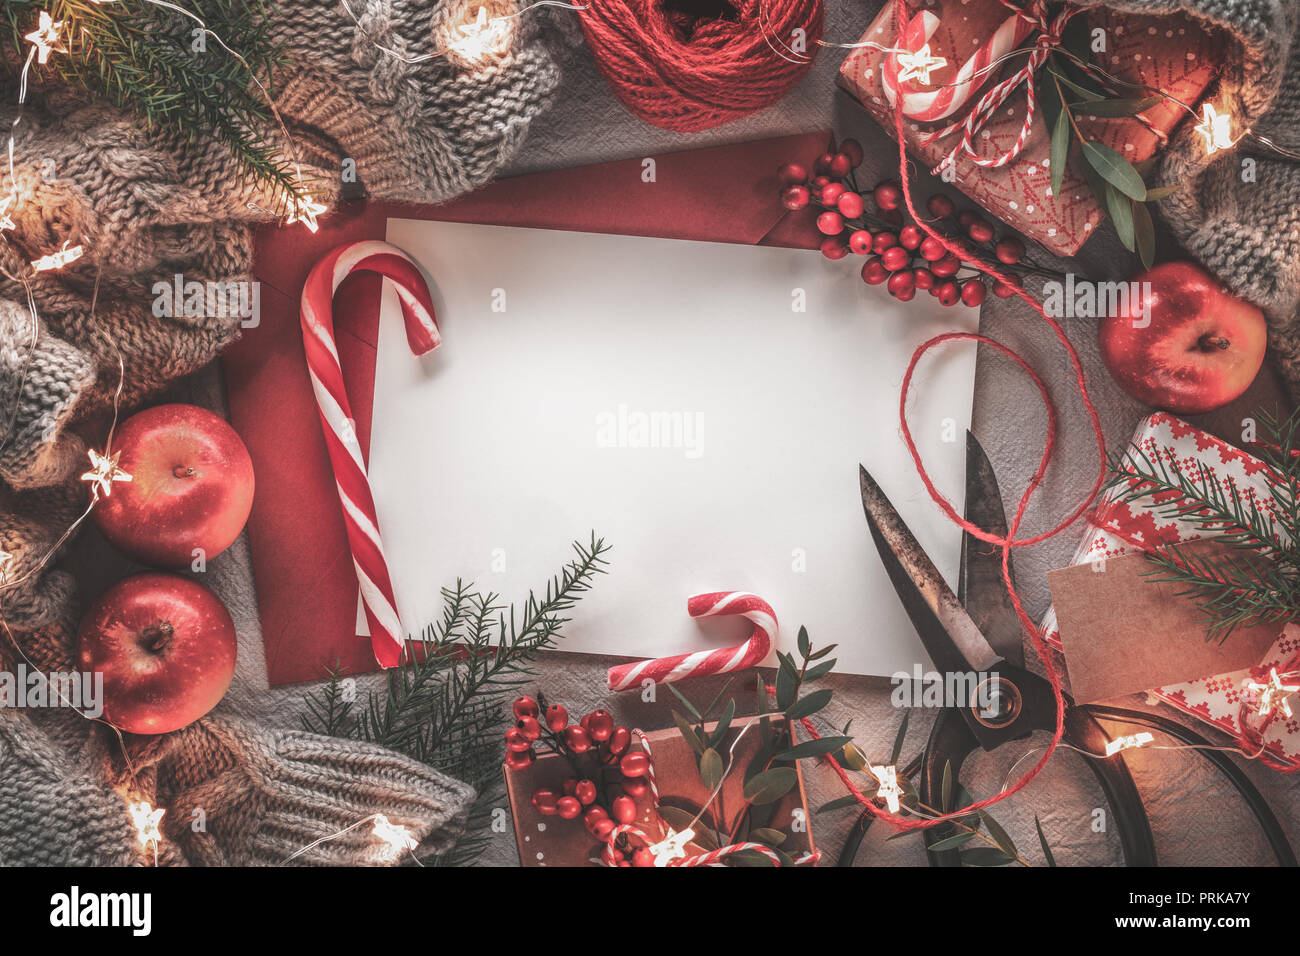 Christmas letter,fruits,gift boxes and warm sweater Stock Photo